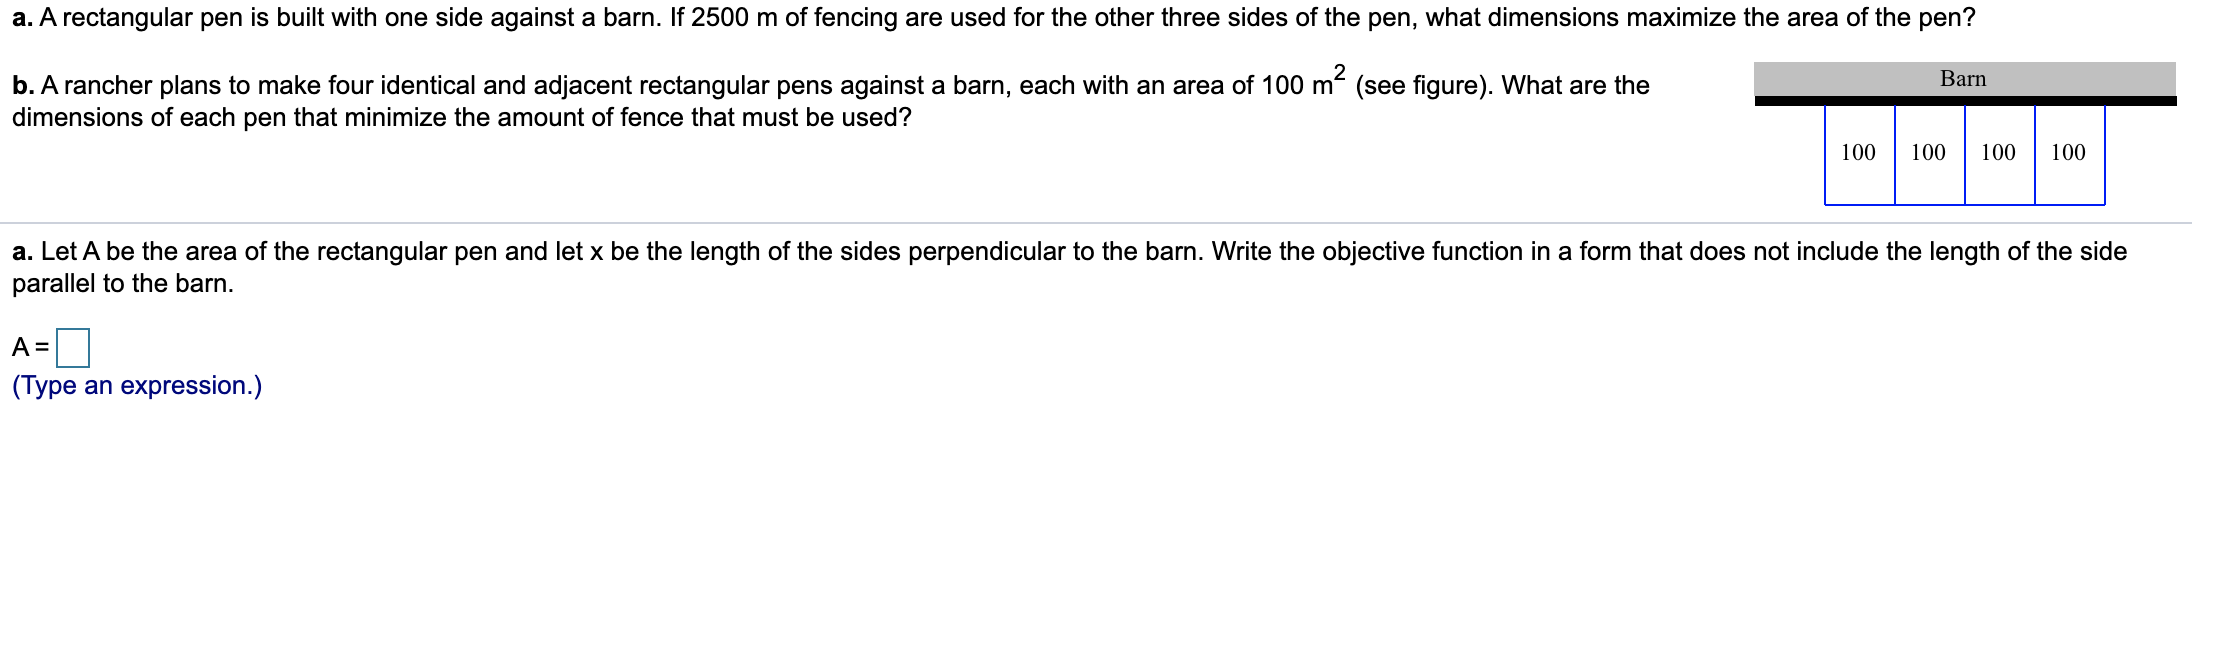 a. A rectangular pen is built with one side against a barn. If 2500 m of fencing are used for the other three sides of the pen, what dimensions maximize the area of the pen?
b. A rancher plans to make four identical and adjacent rectangular pens against a barn, each with an area of 100 m (see figure). What are the
dimensions of each pen that minimize the amount of fence that must be used?
Barn
100
100
100
100
a. Let A be the area of the rectangular pen and let x be the length of the sides perpendicular to the barn. Write the objective function in a form that does not include the length of the side
parallel to the barn.
(Type an expression.)
